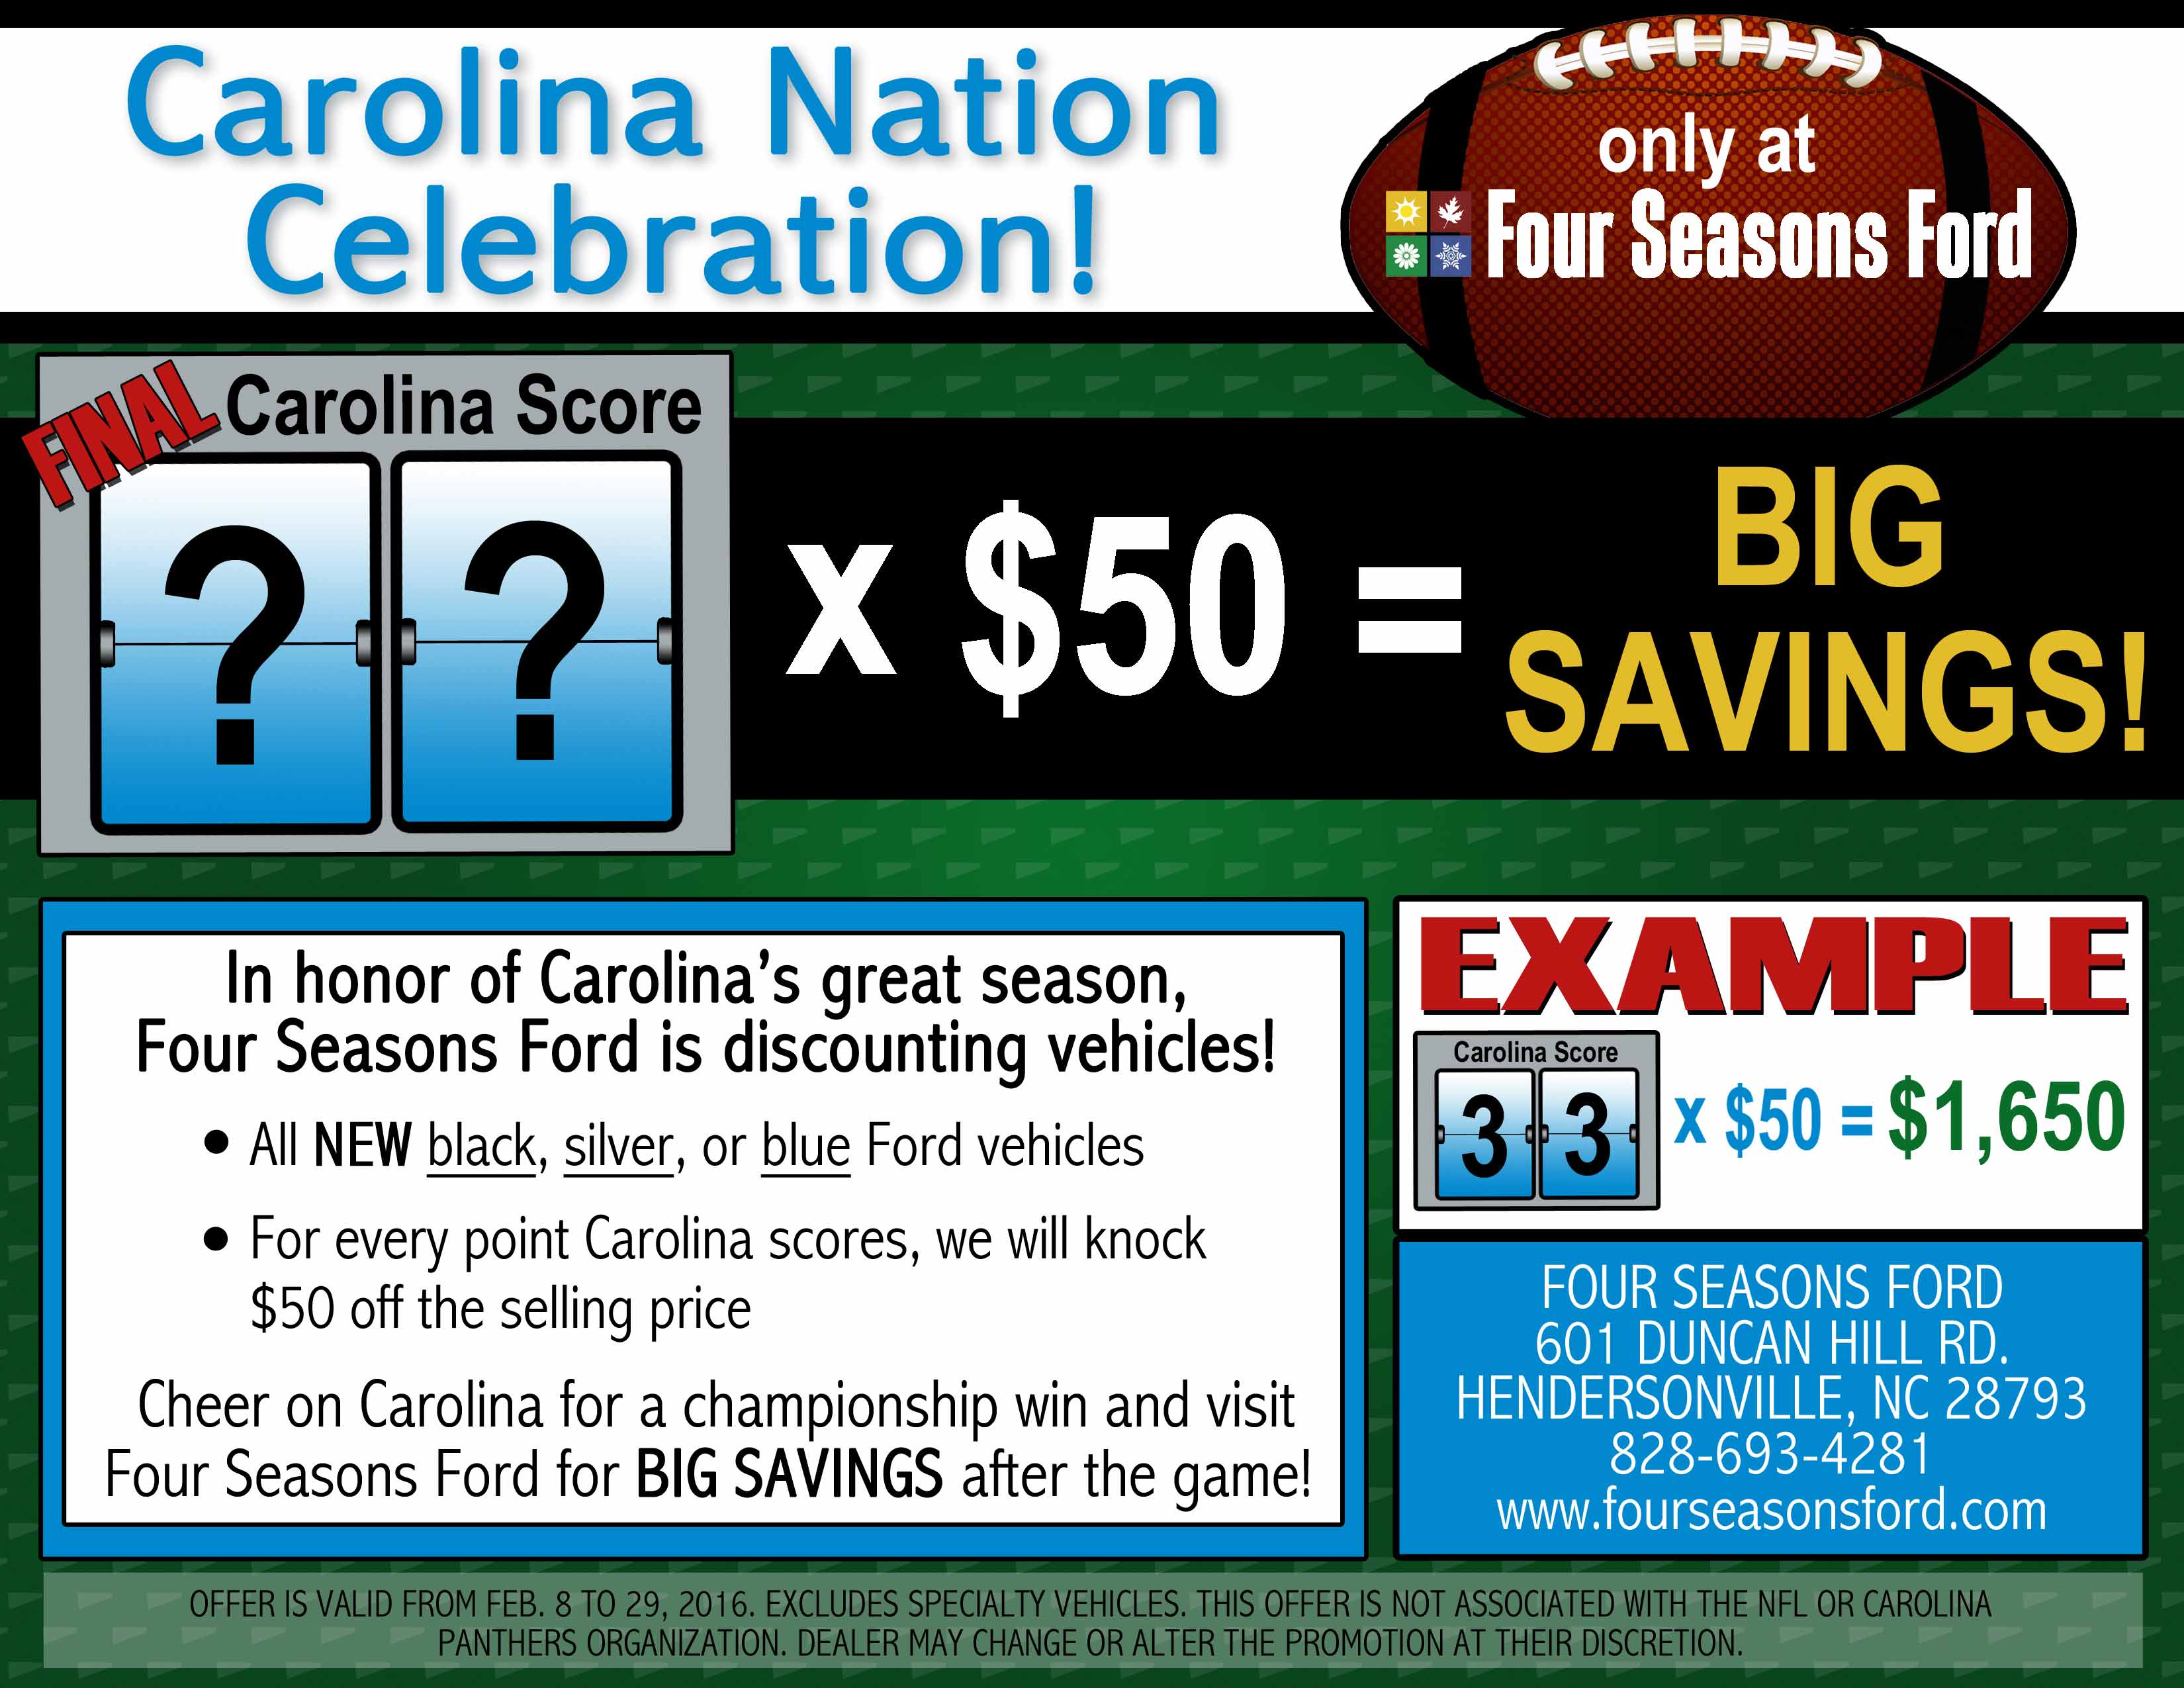 Cheer on the Panthers for Huge Savings at Four Seasons Ford #SuperBowl #KeepPounding